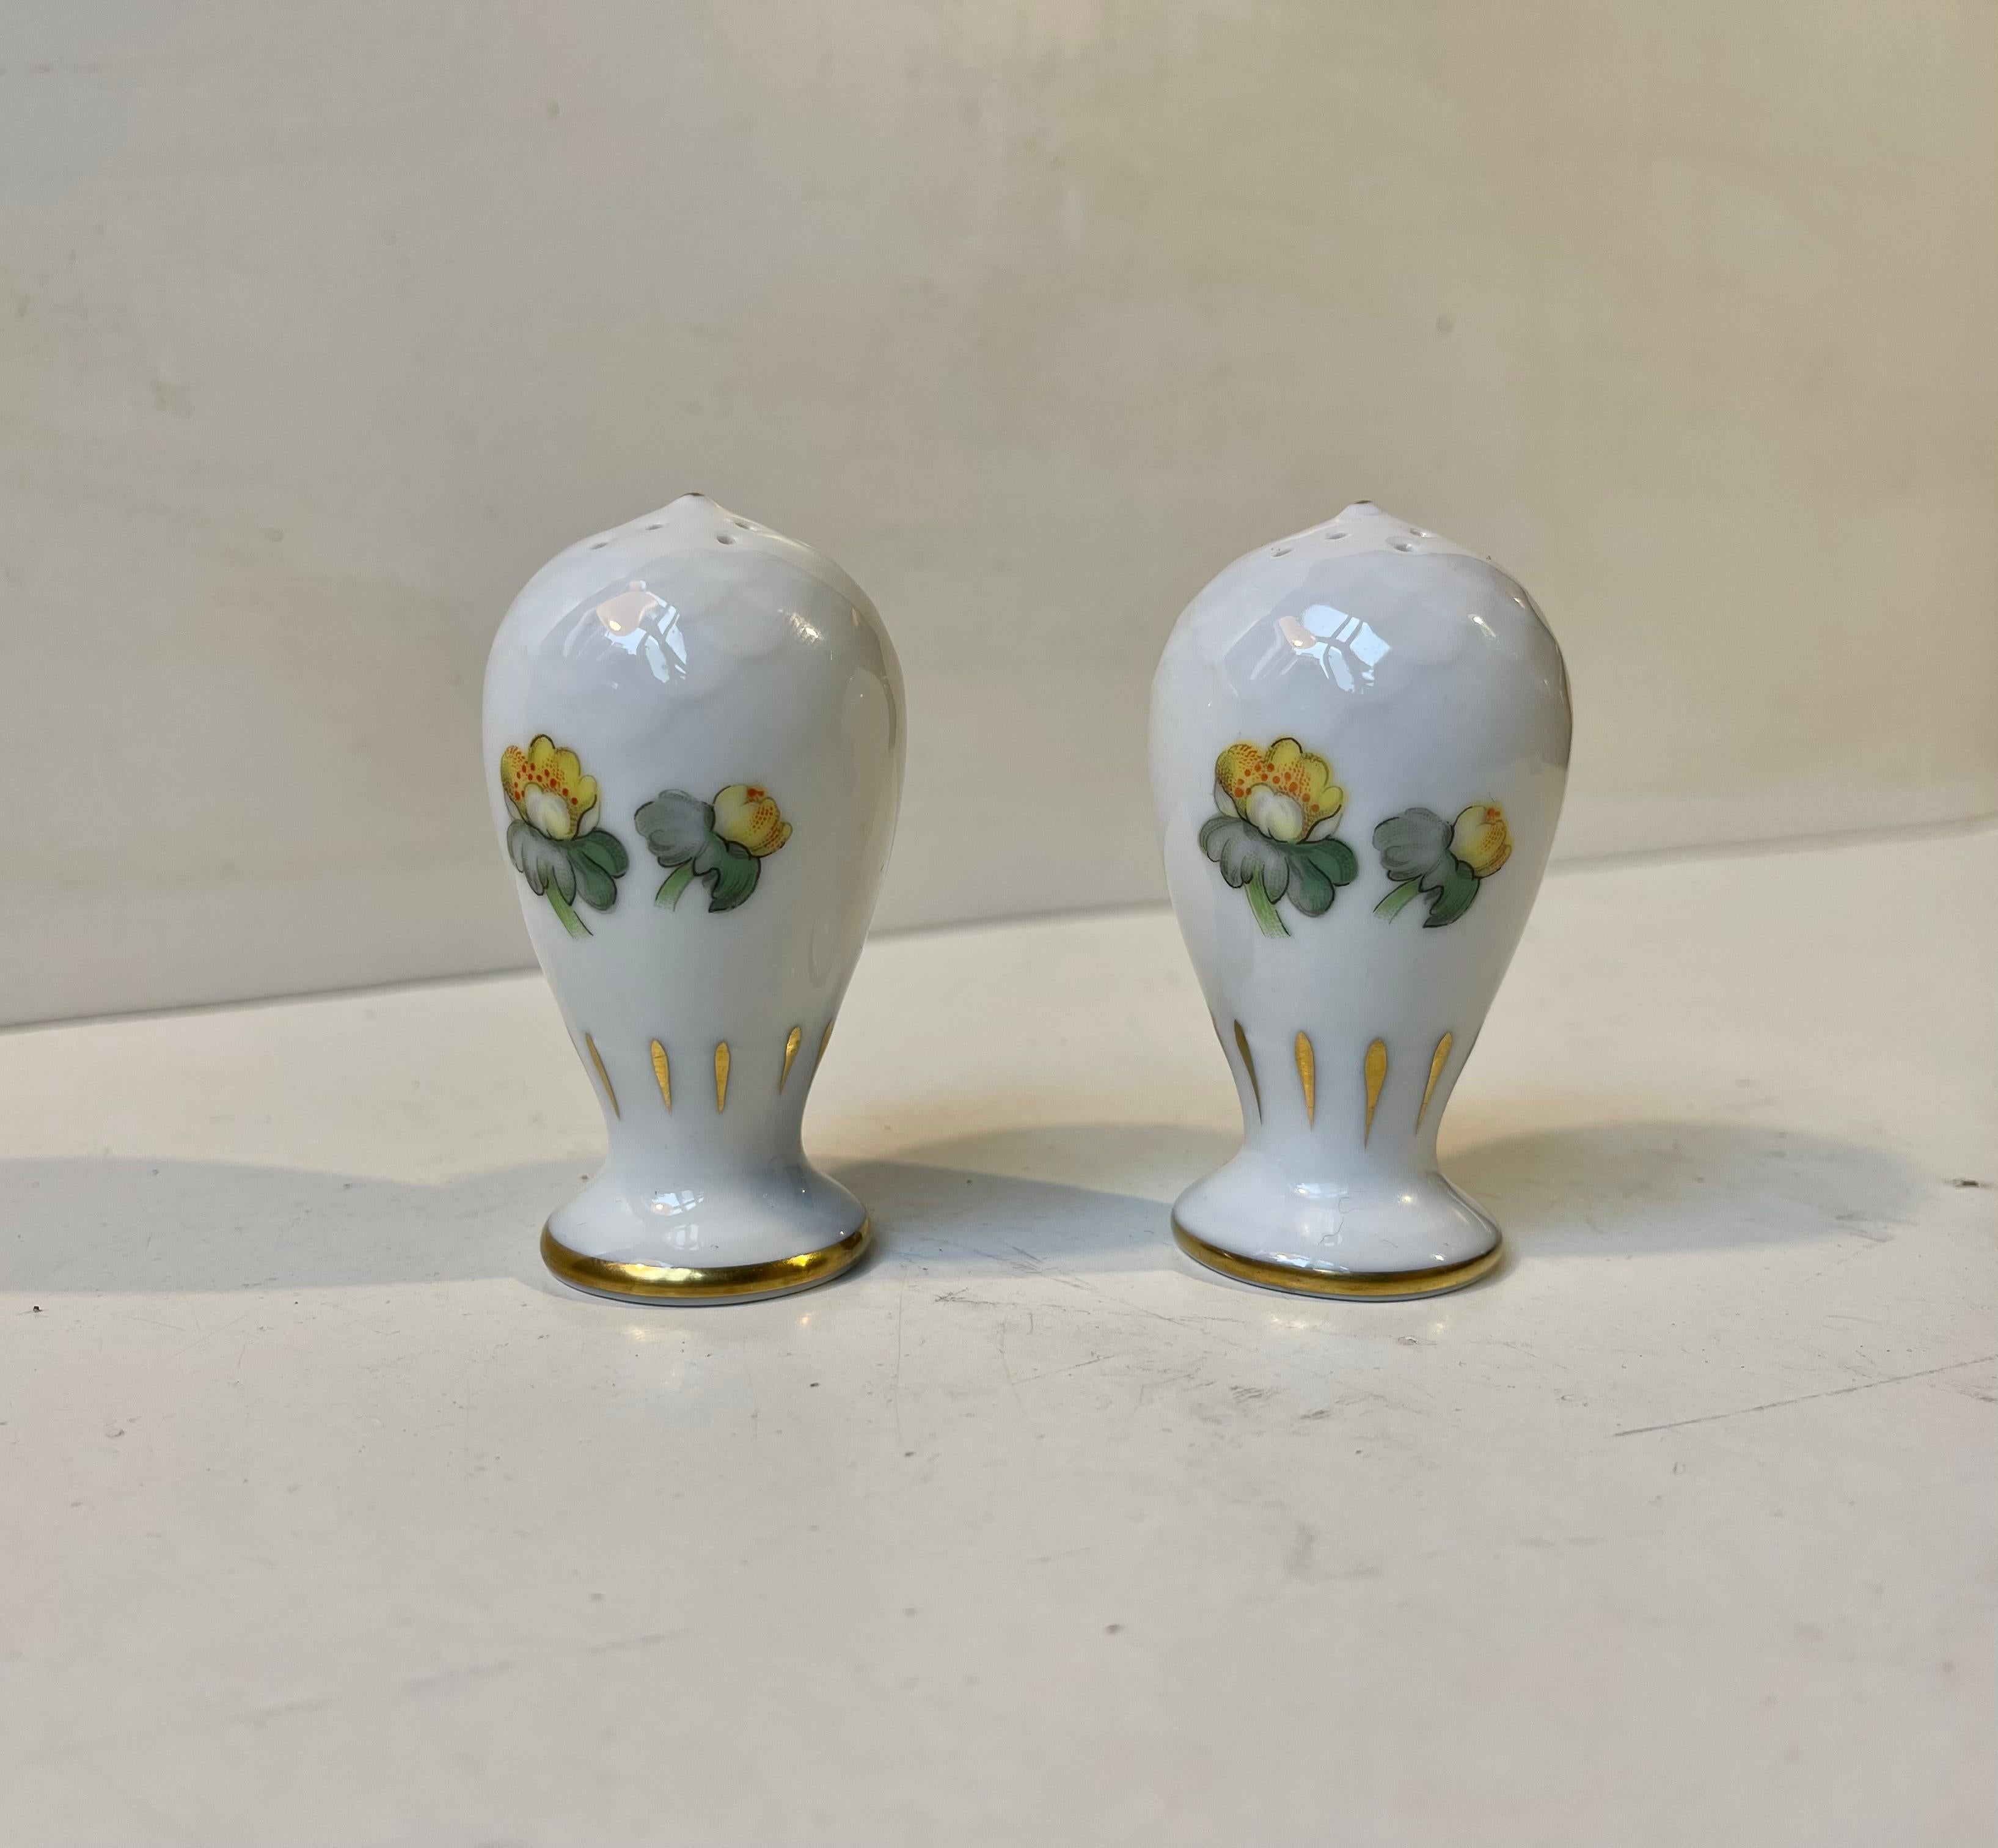 Danish Porcelain Salt and Pepper shakers with Hand-Painted Errants by Bing & Grondahl  For Sale